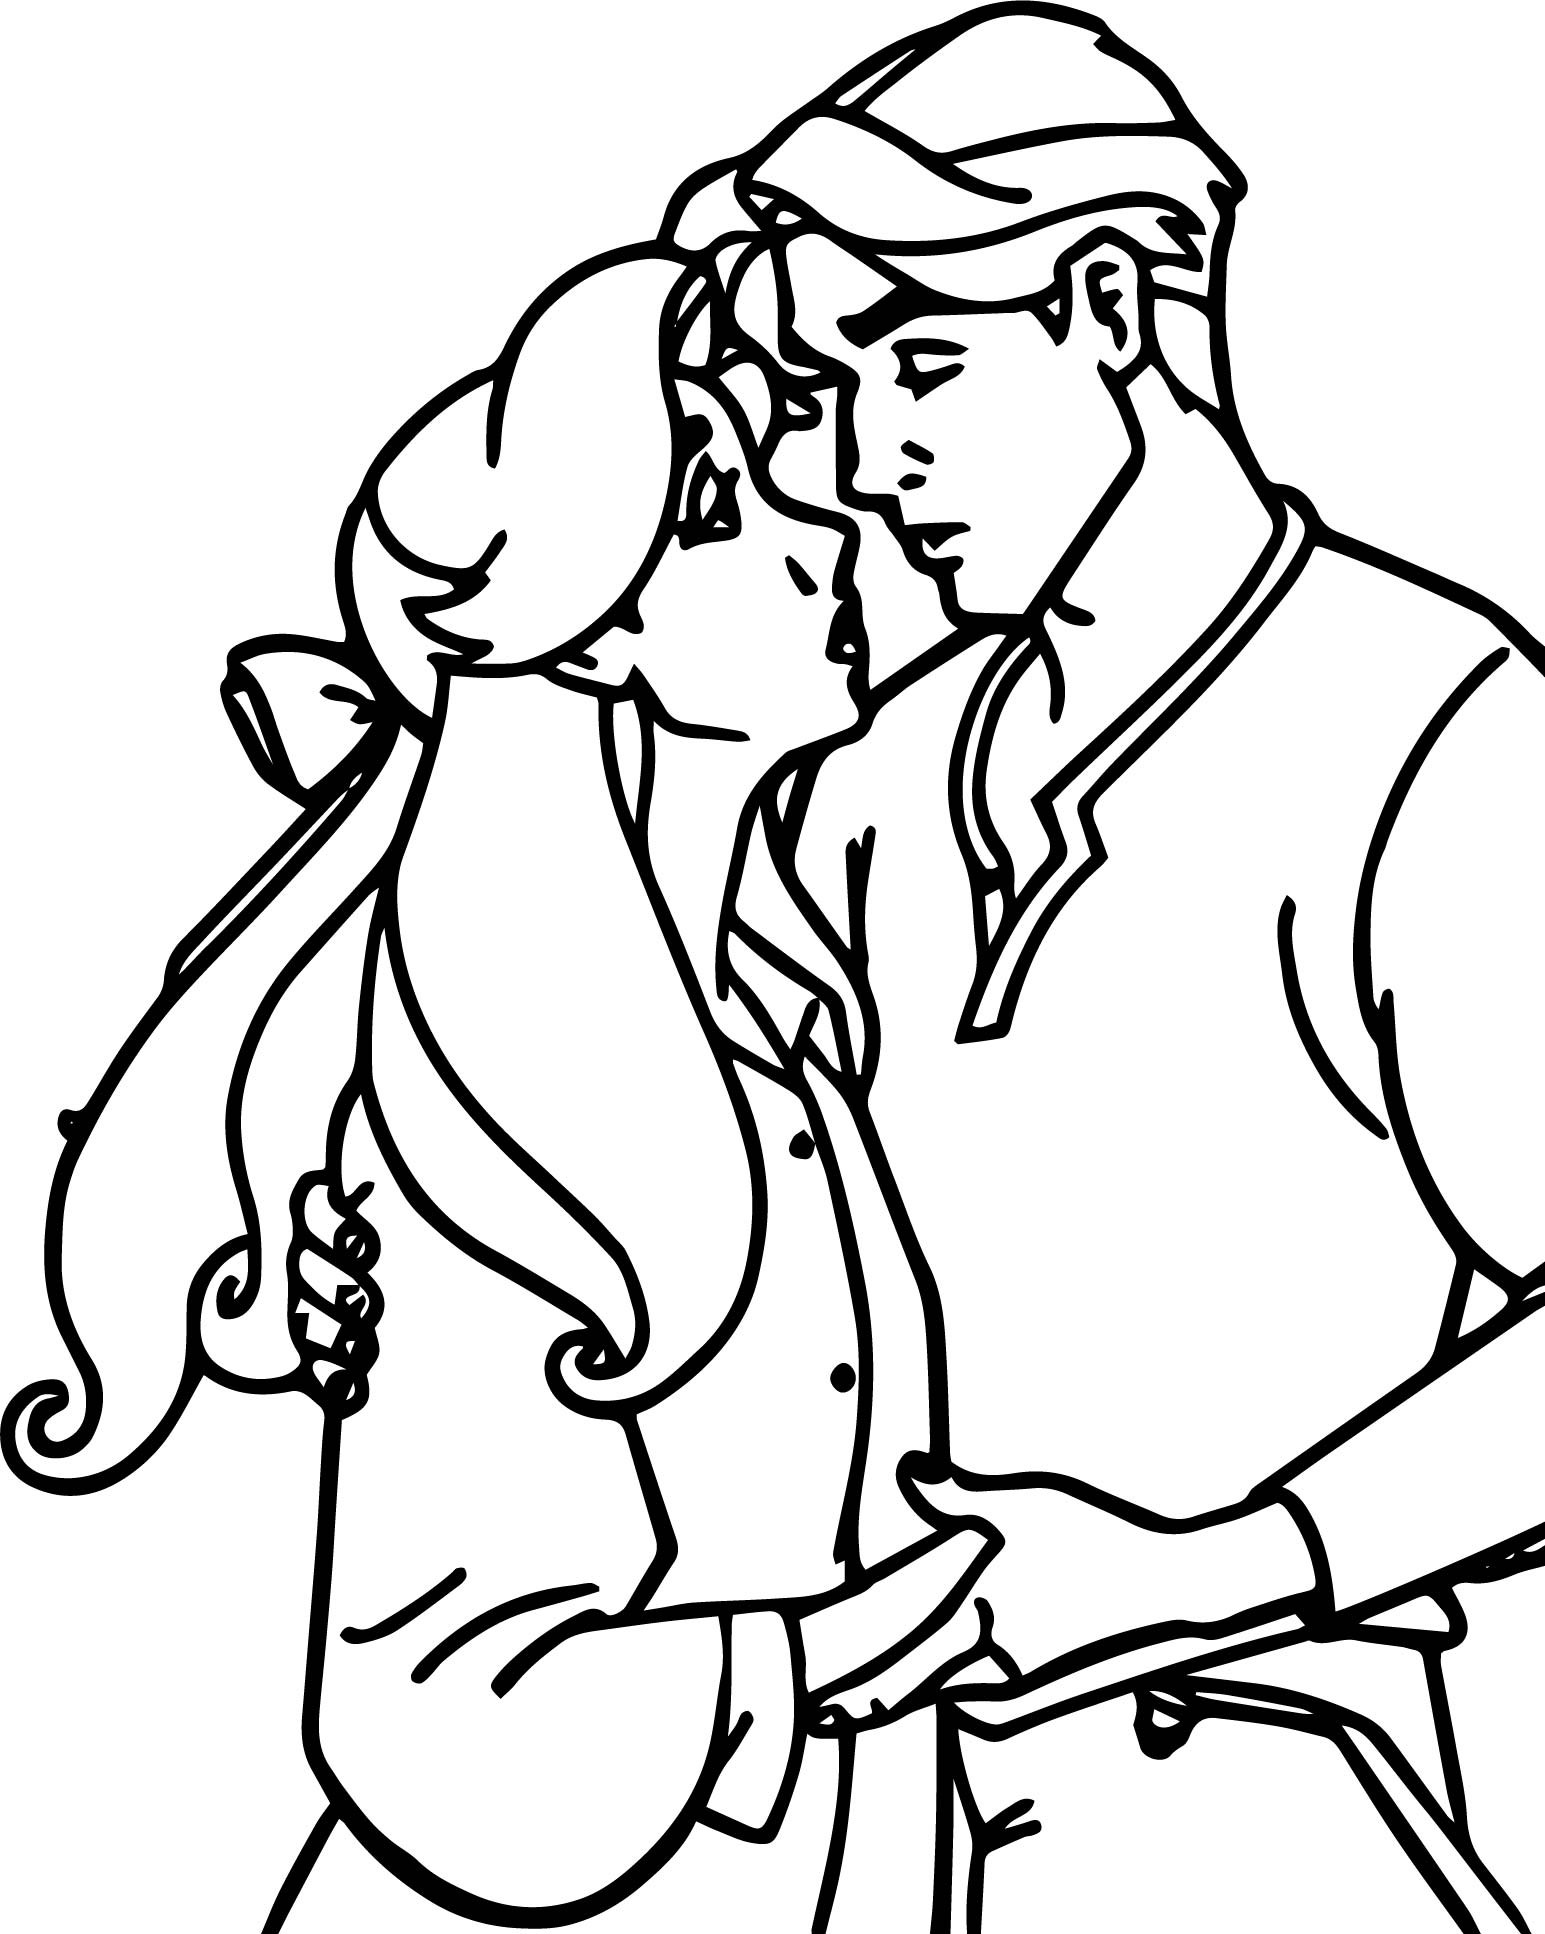 Girlfriend And Boyfriend Coloring Pages
 Boyfriend Pages Coloring Pages